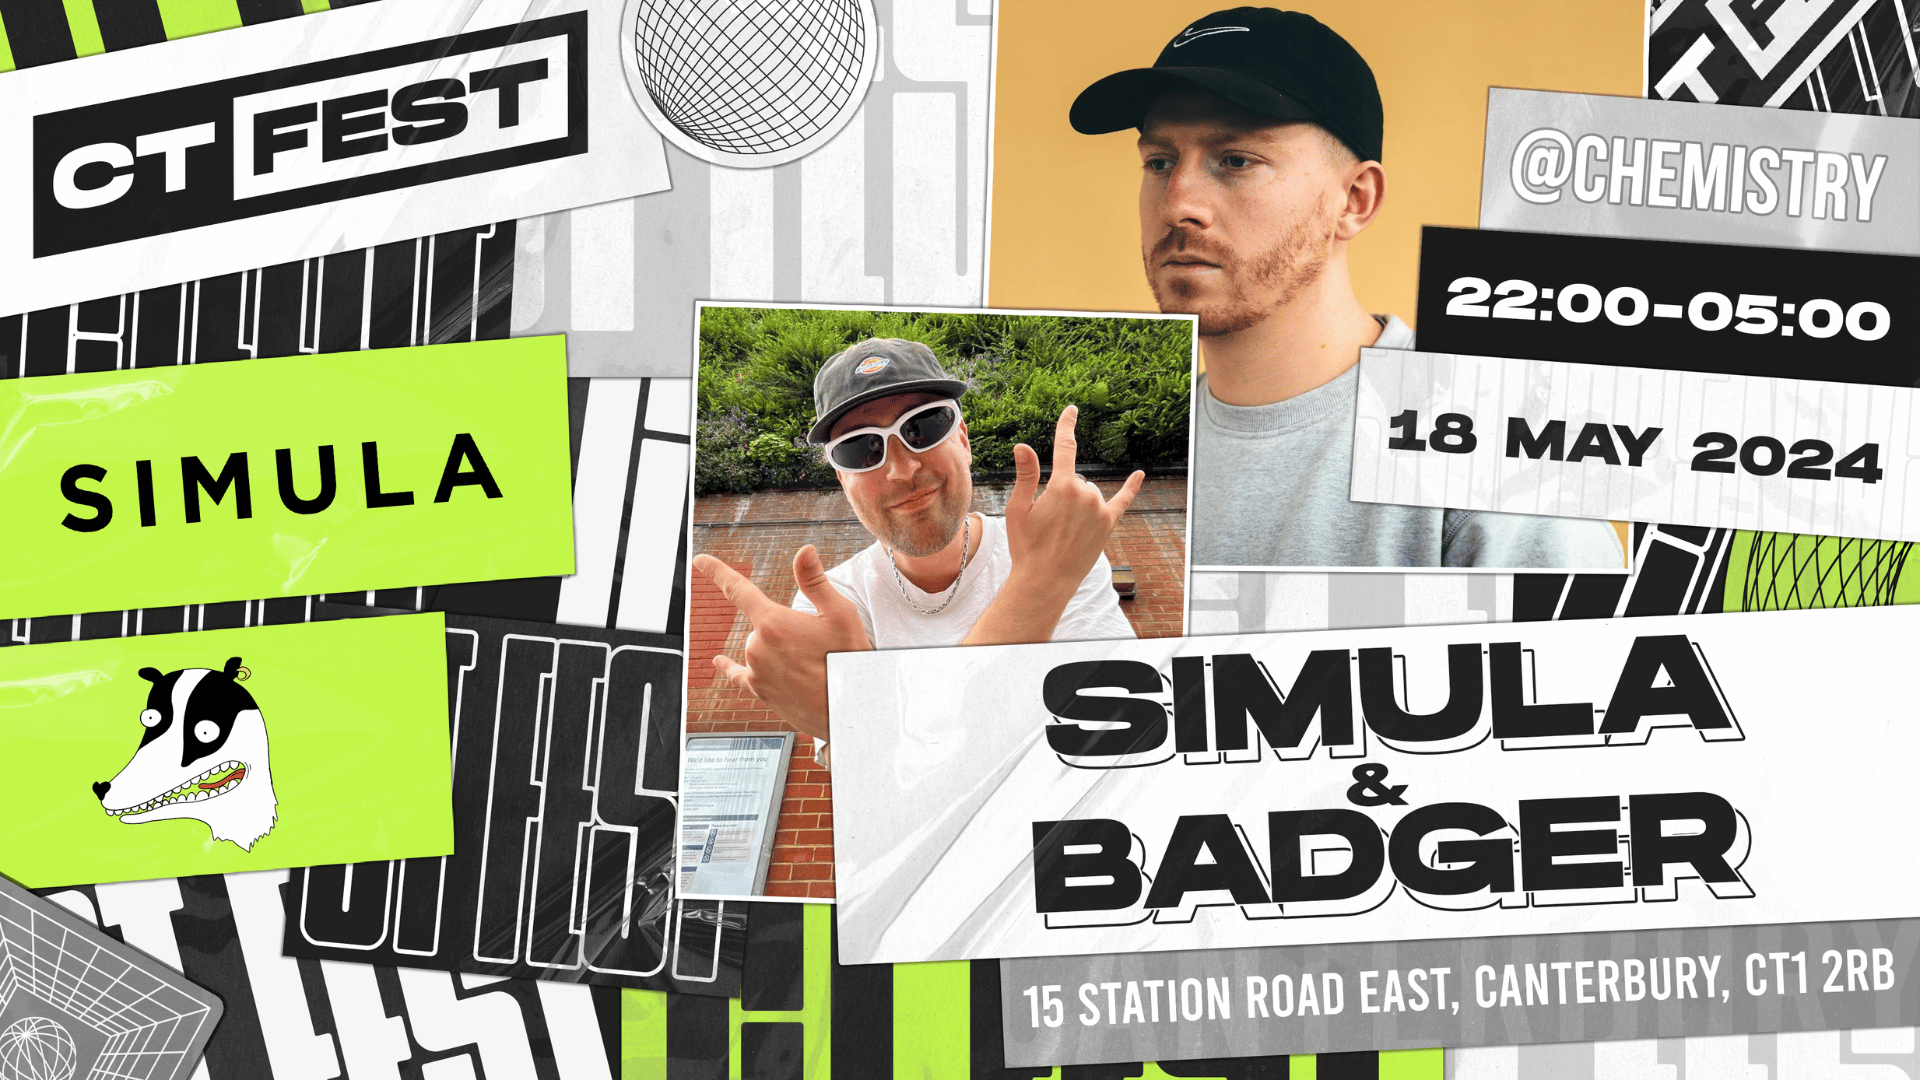 CT Fest ∙ SIMULA & BADGER *ONLY 25 £6 TICKETS LEFT*